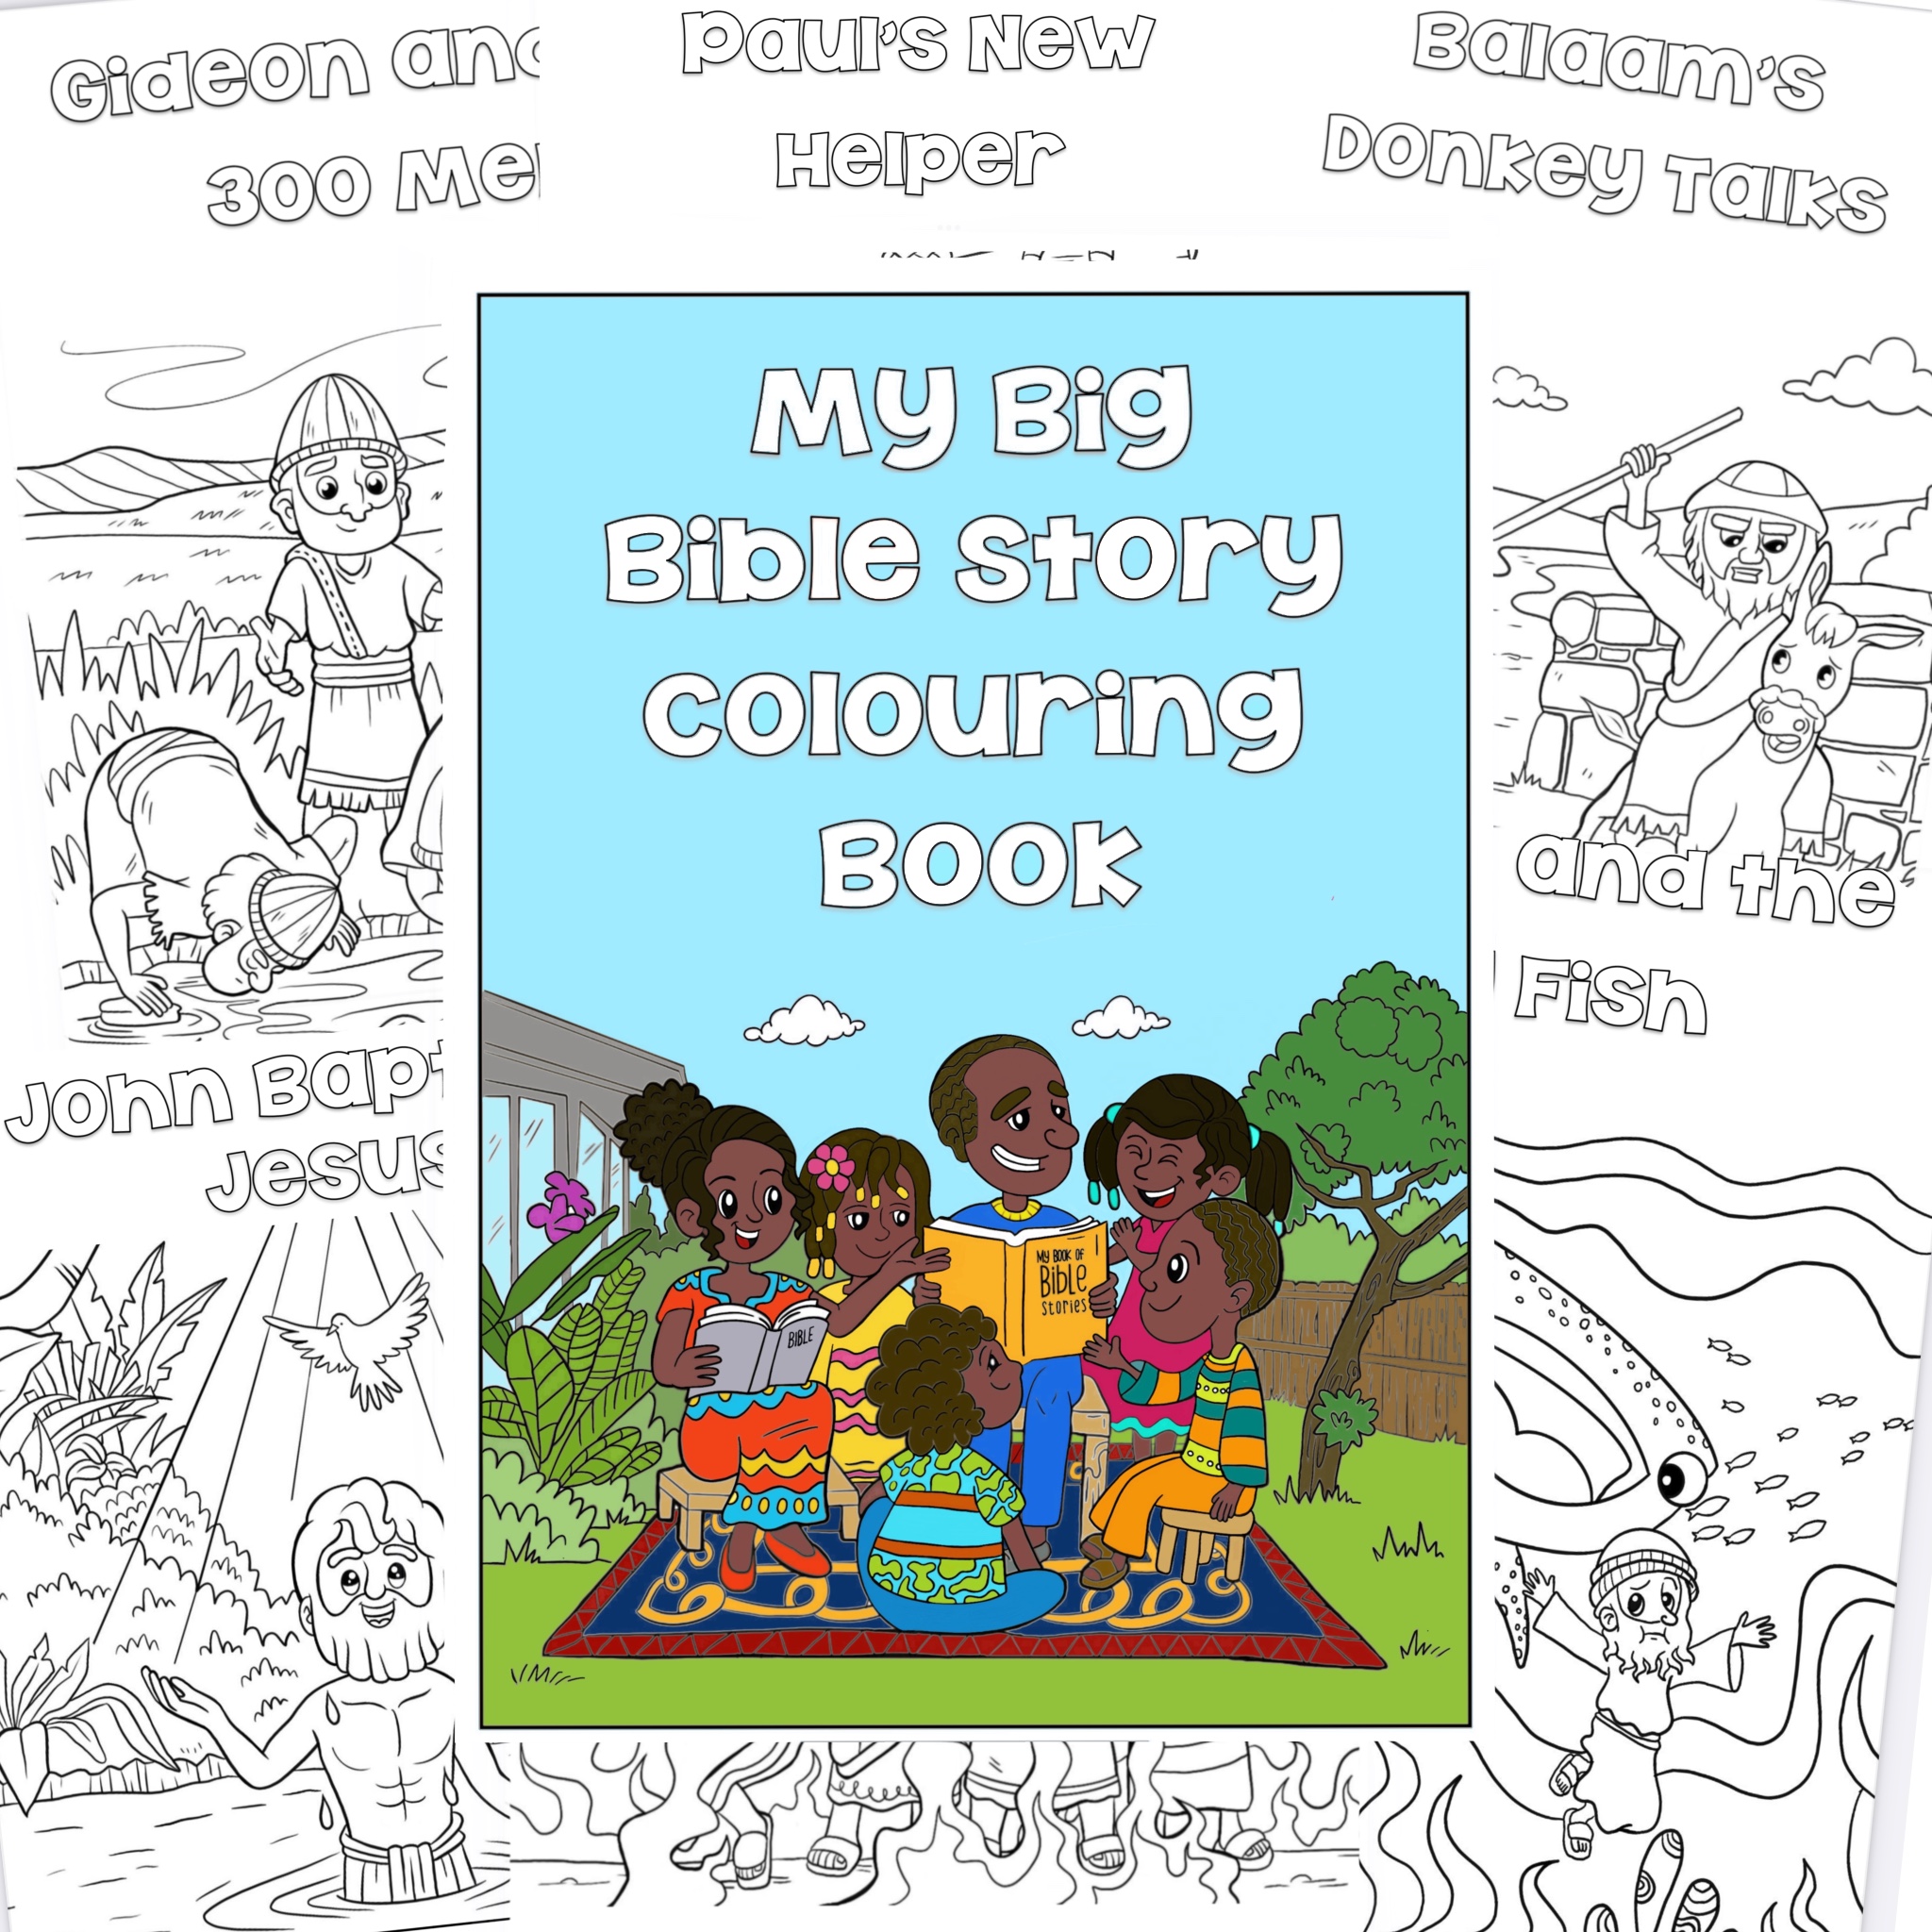 gideon bible coloring pages